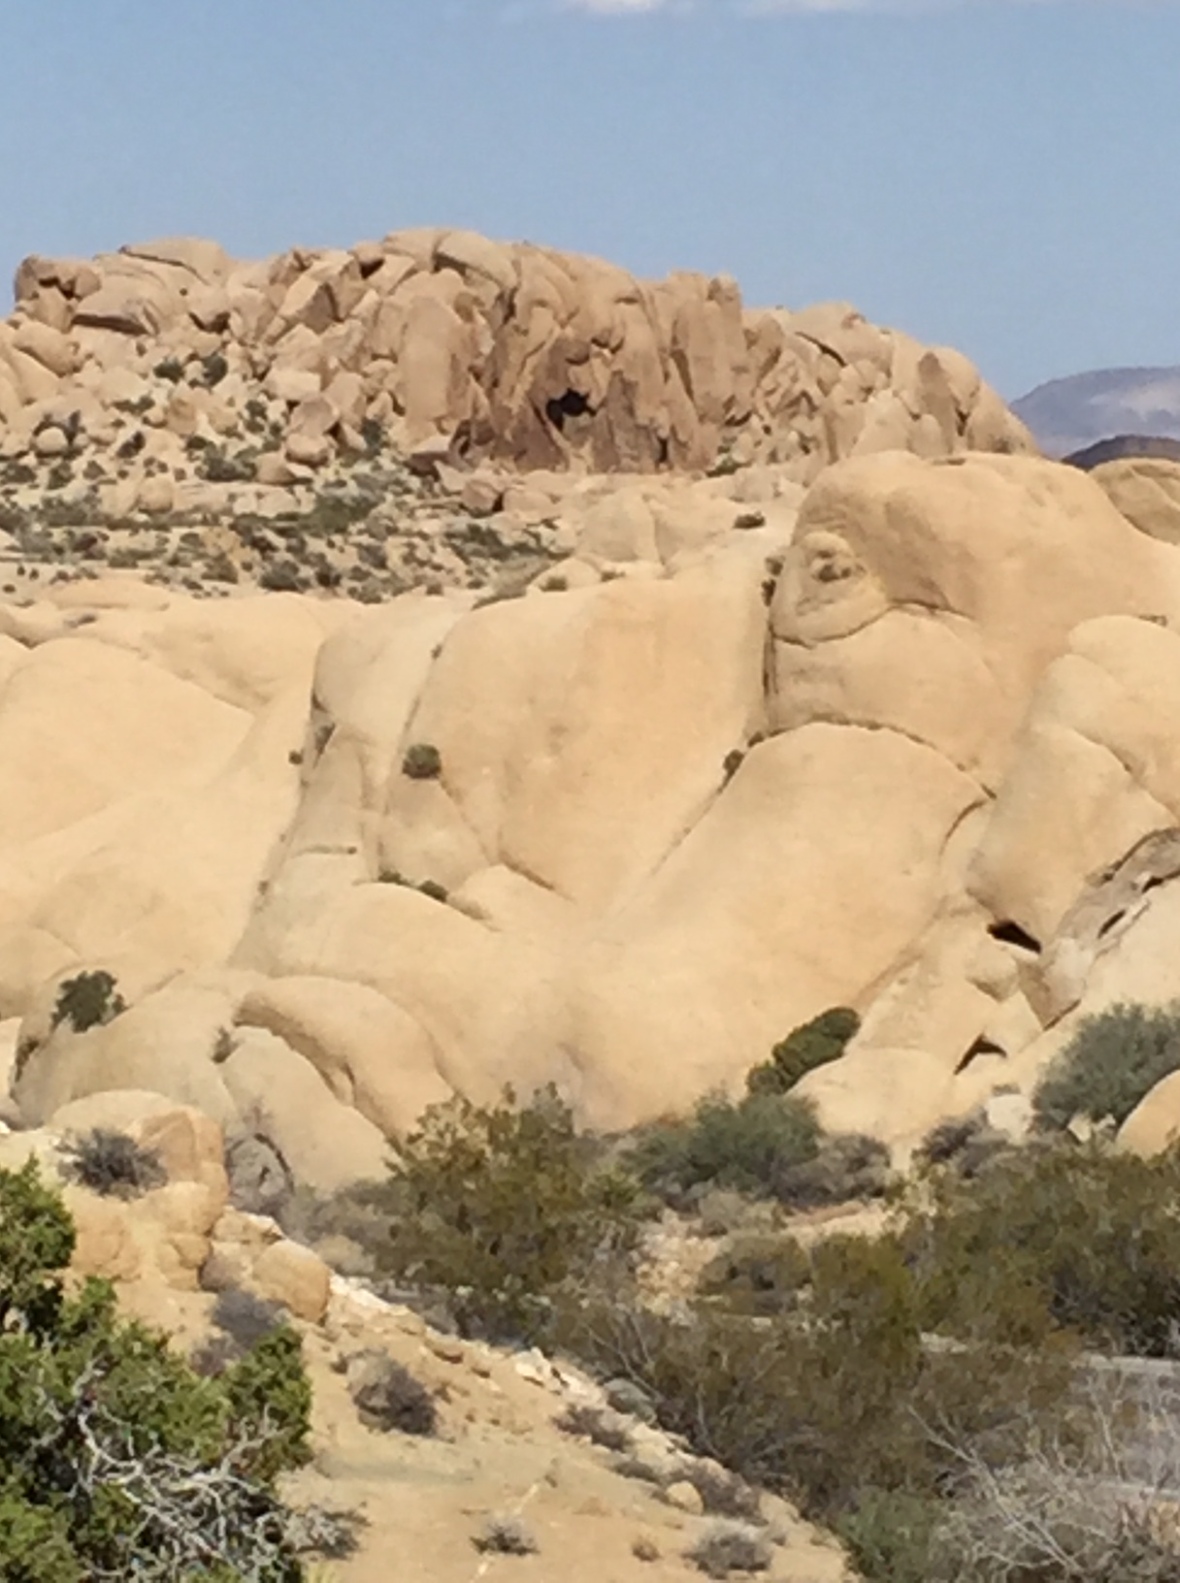 The desert was playing tricks on me. I kept seeing faces in the rocks!